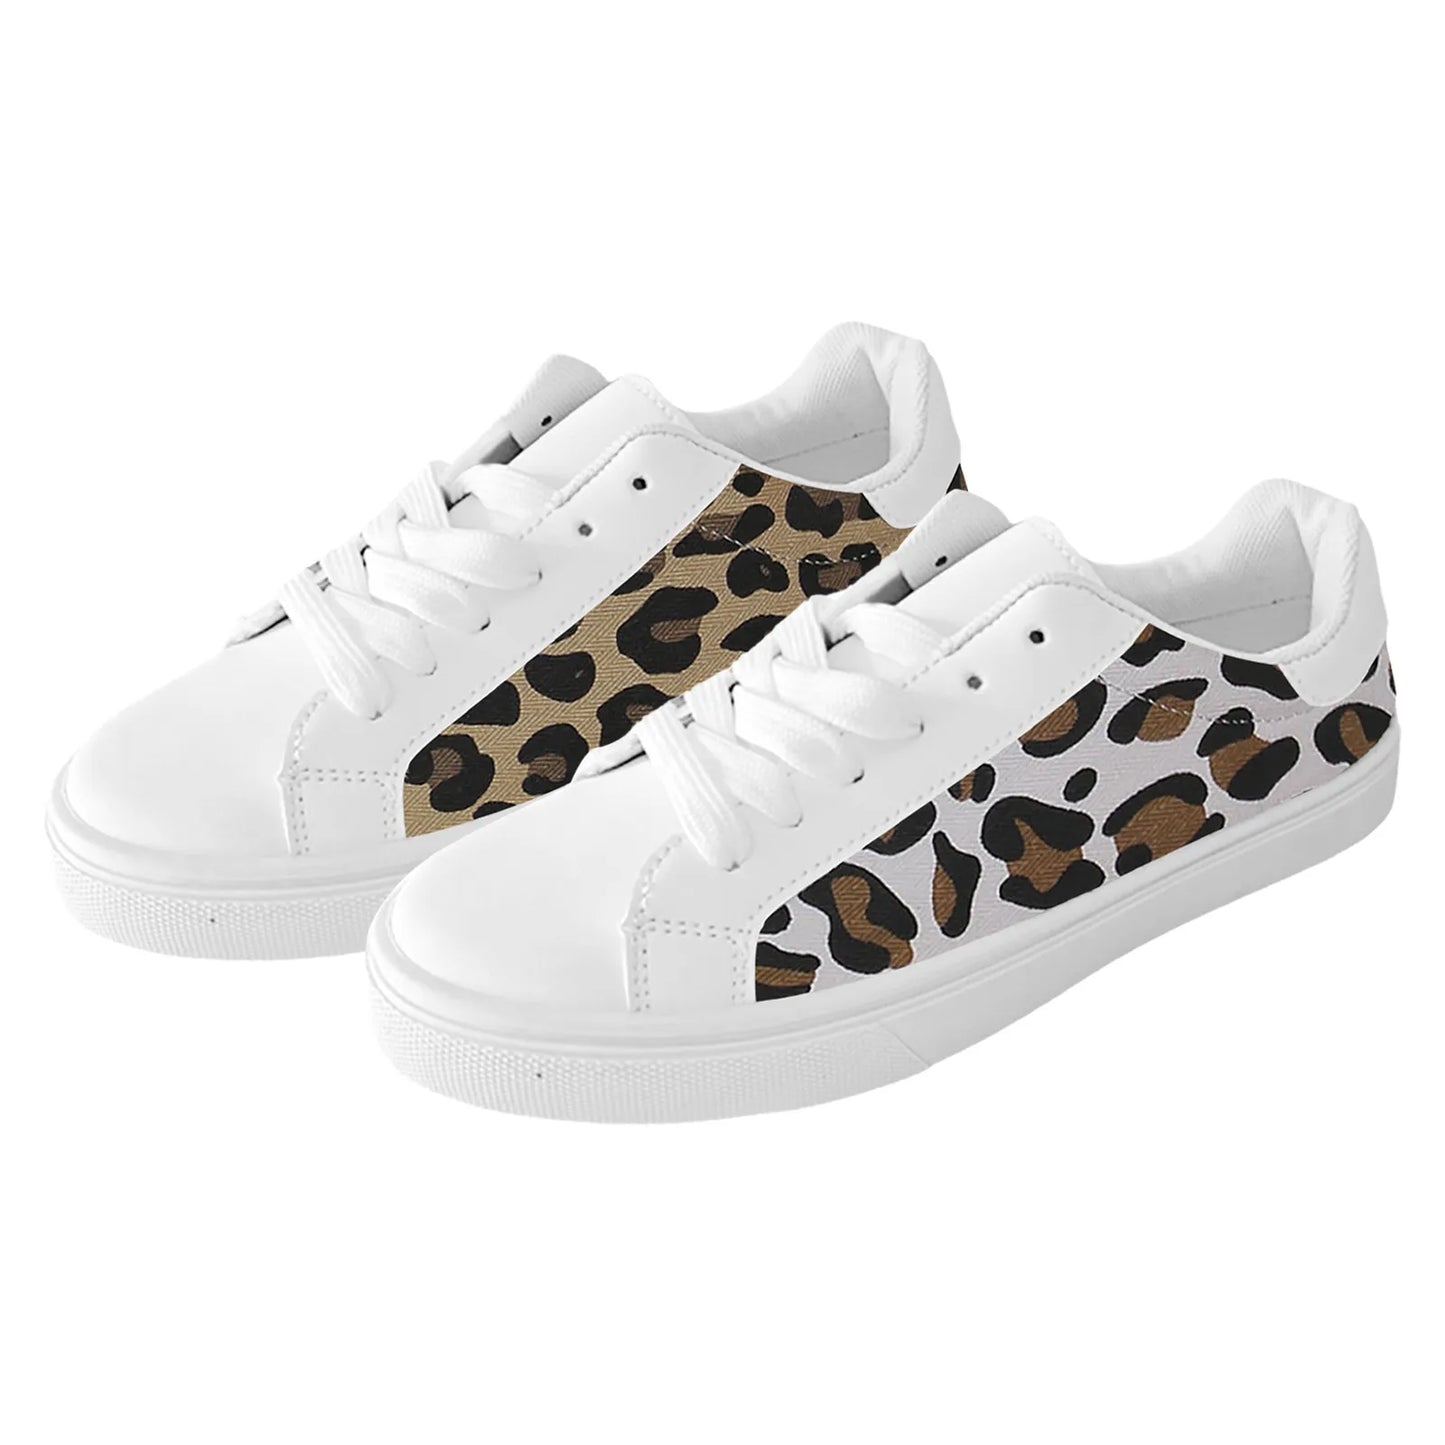 Leopard Print Casual Shoes For Women/Spring Autumn Round Toe Flat Bottom Lace Up